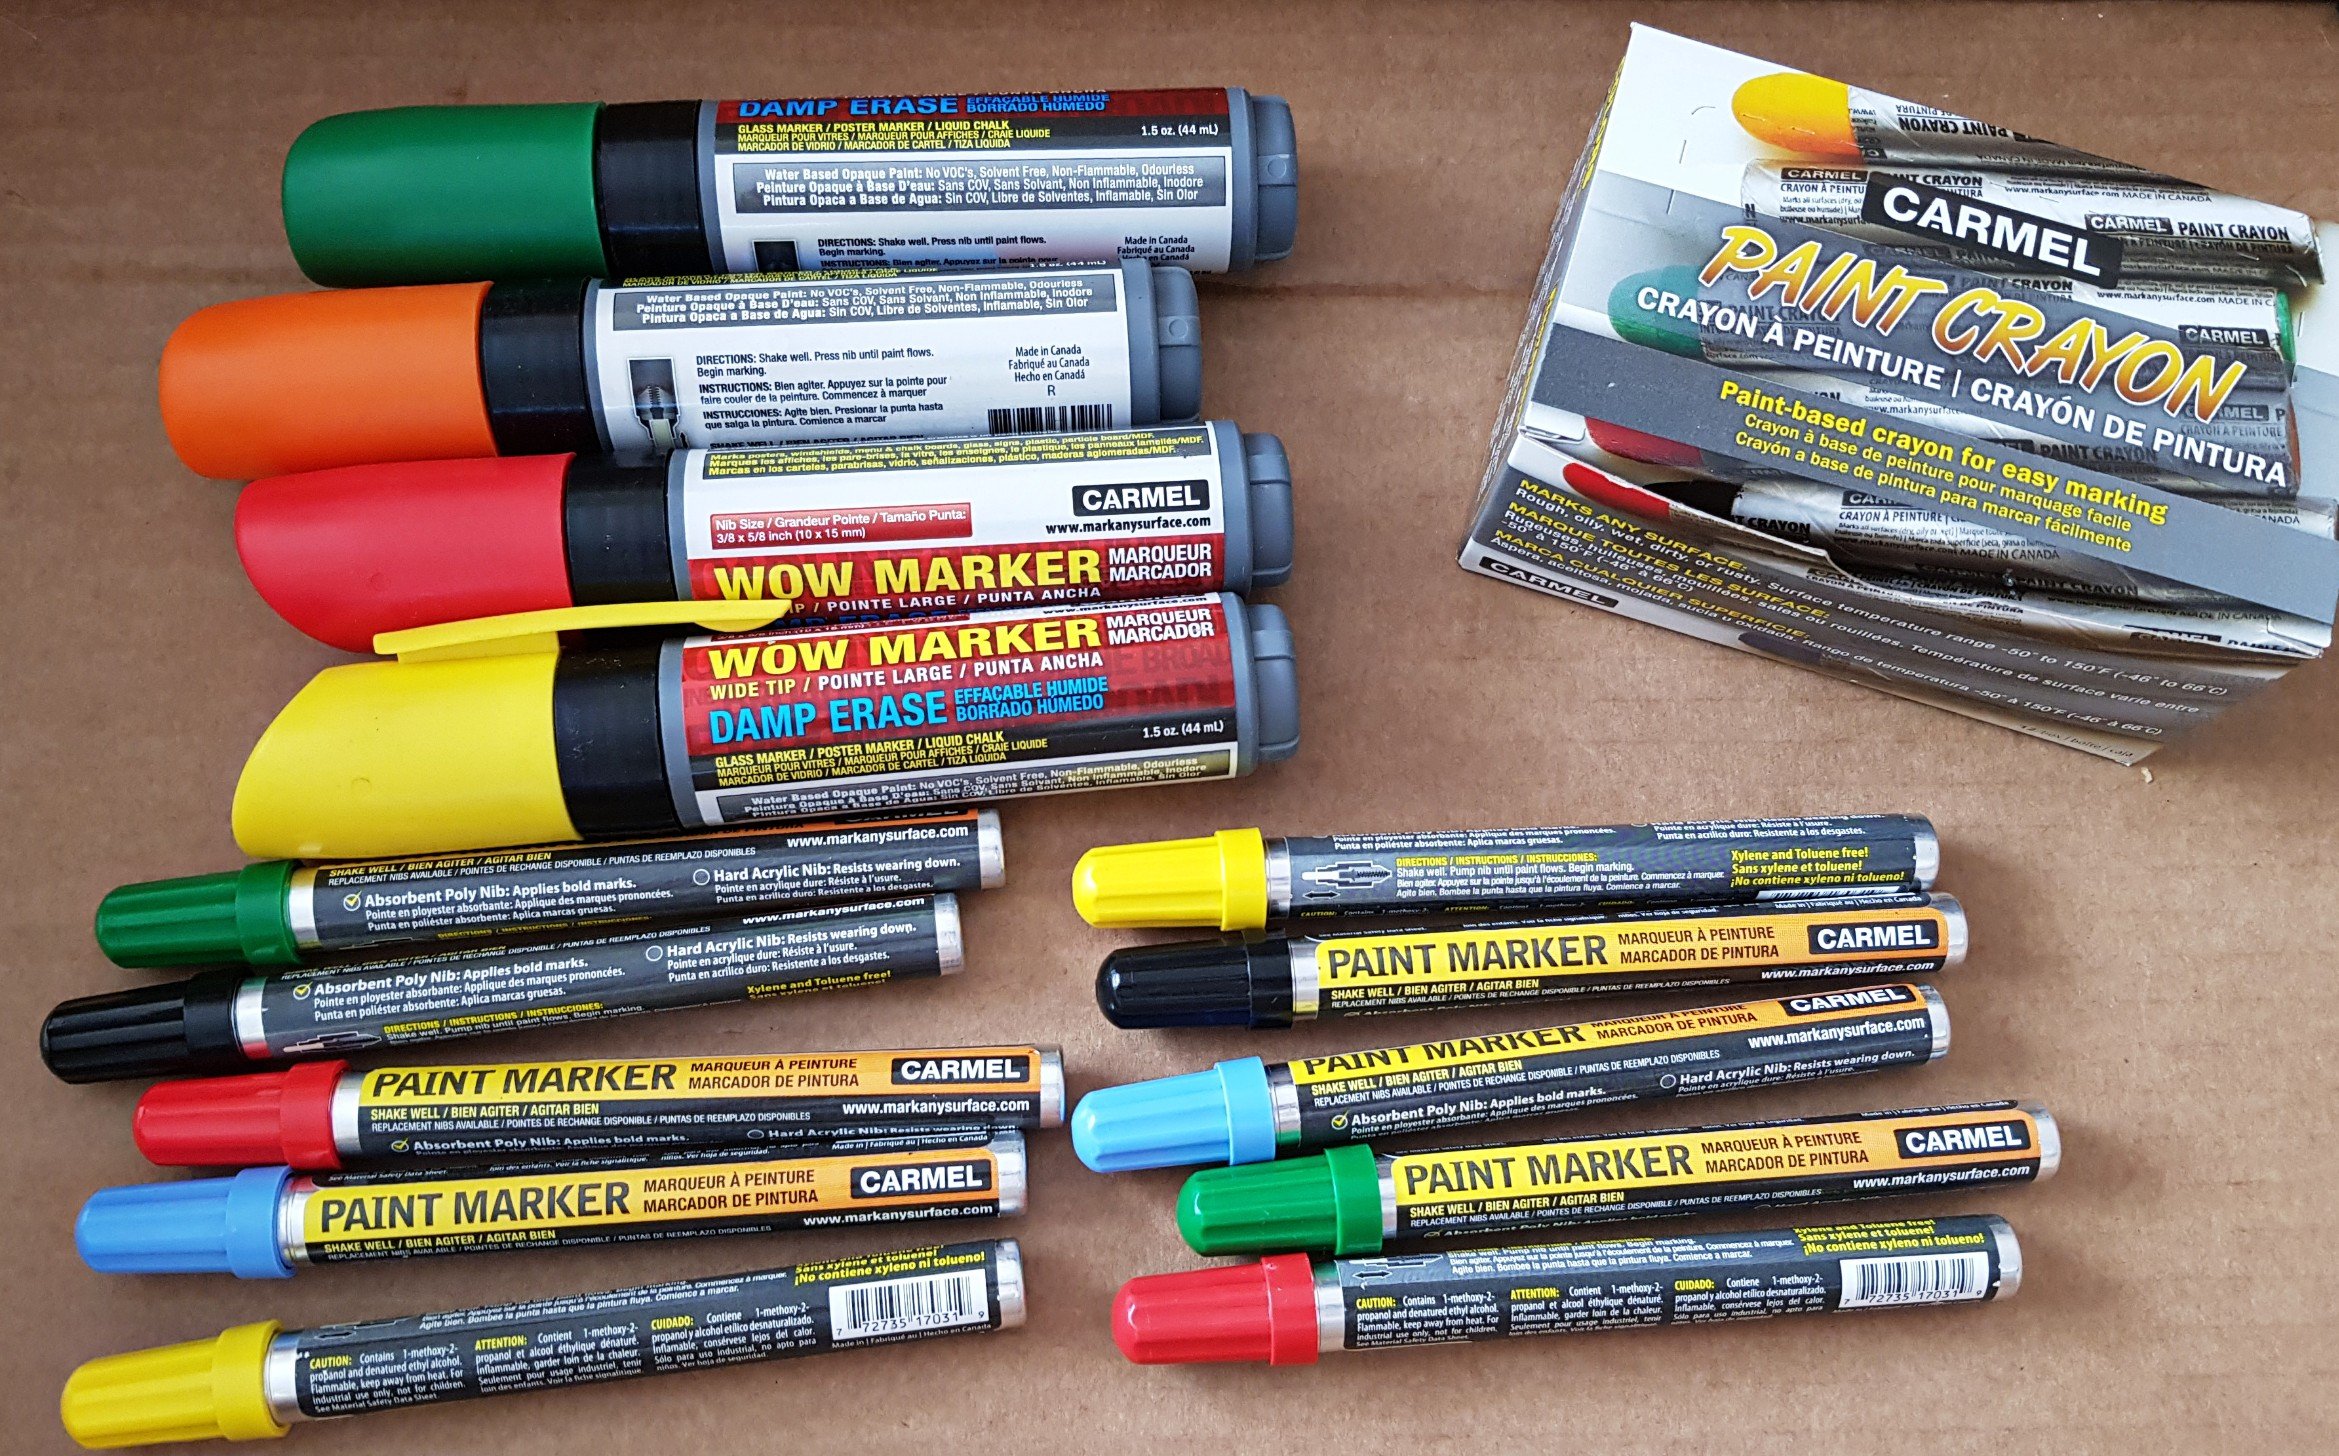 Selection of Carmel Industries Paint Markers, Paint Crayons and Damp Erase Markers.